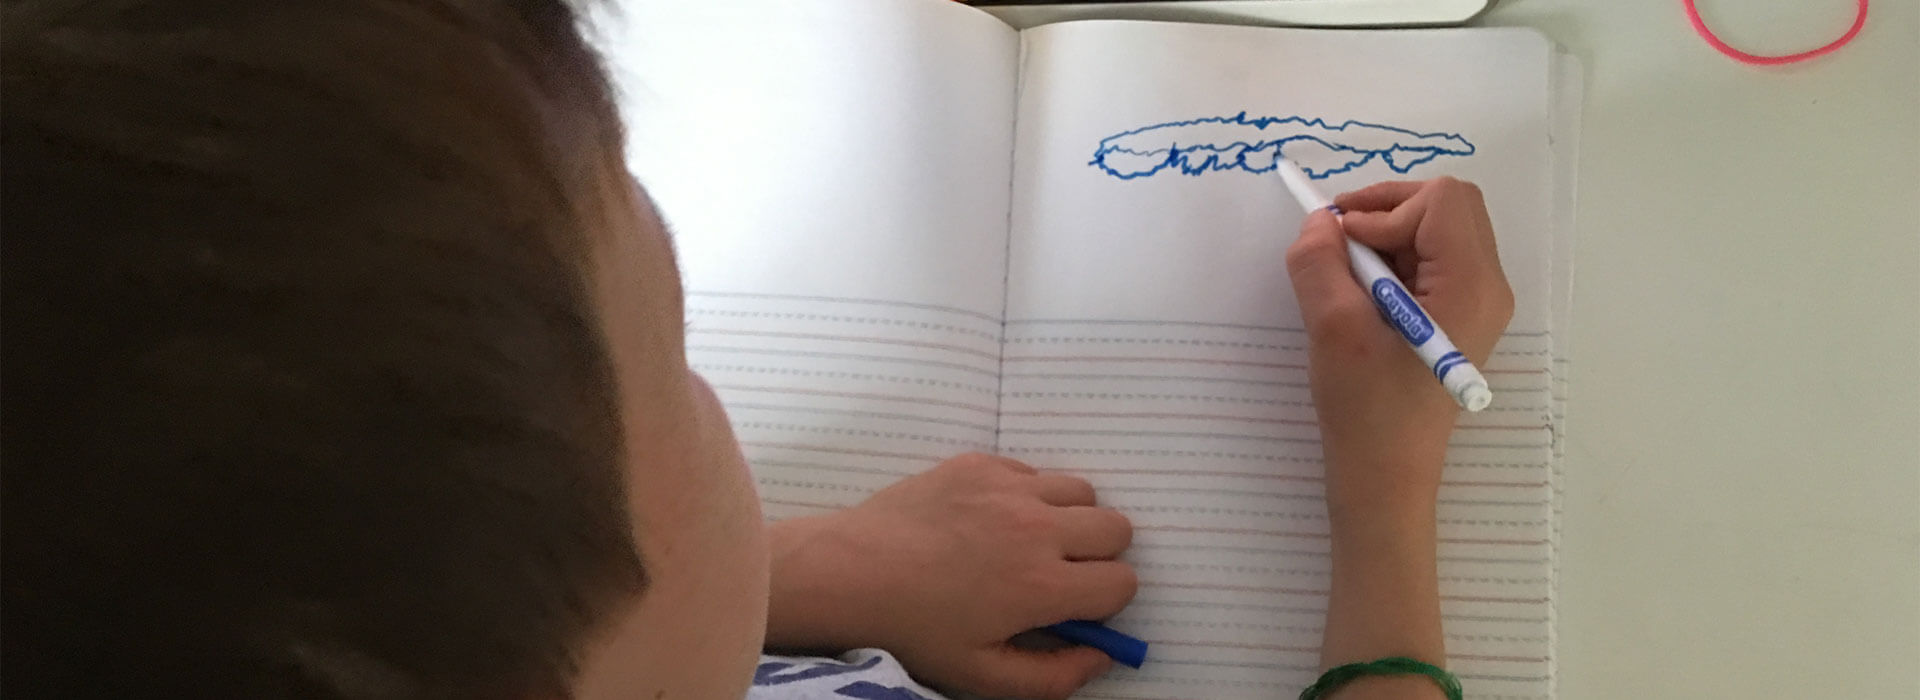 Looking down as a student draws an abstract shape in a notebook using a blue marker while looking at a tablet